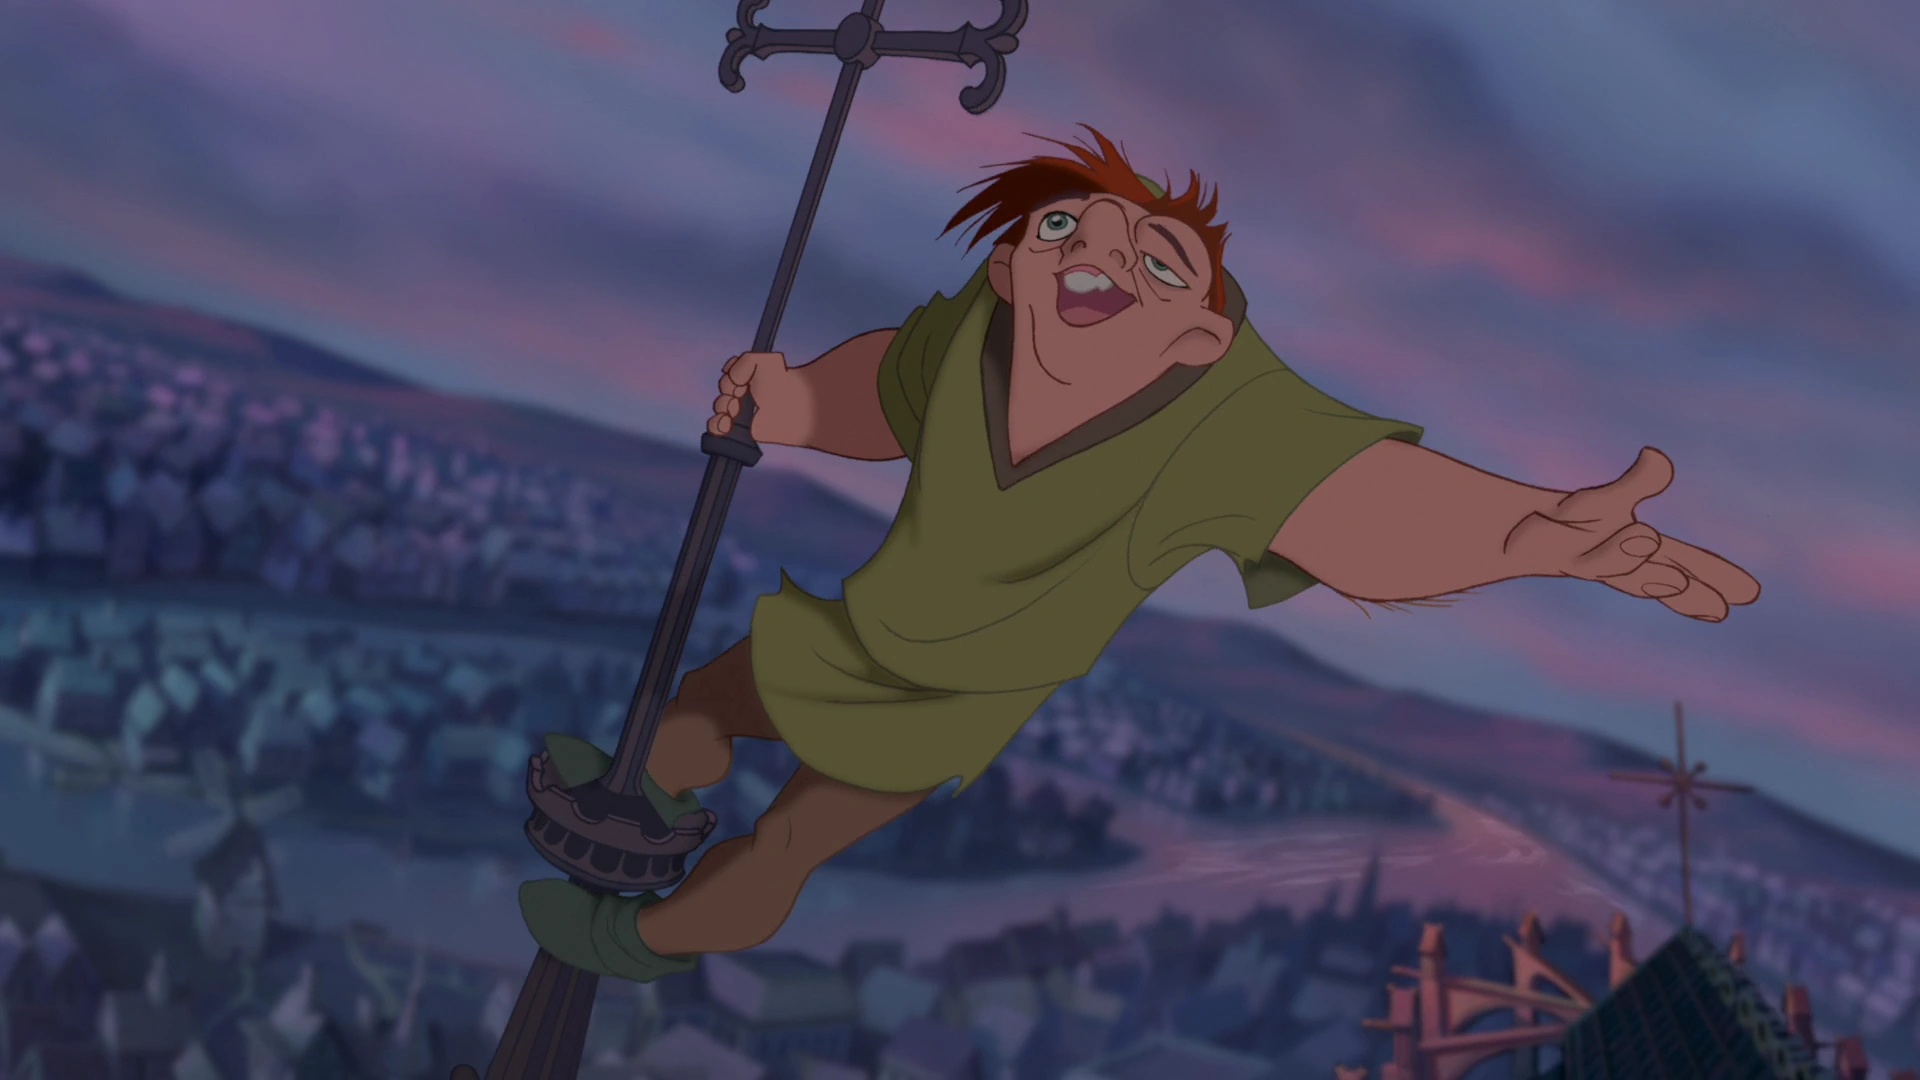 A still from "The Hunchback of Notre Dame", featuring Quasimodo singing on top of the cathedral